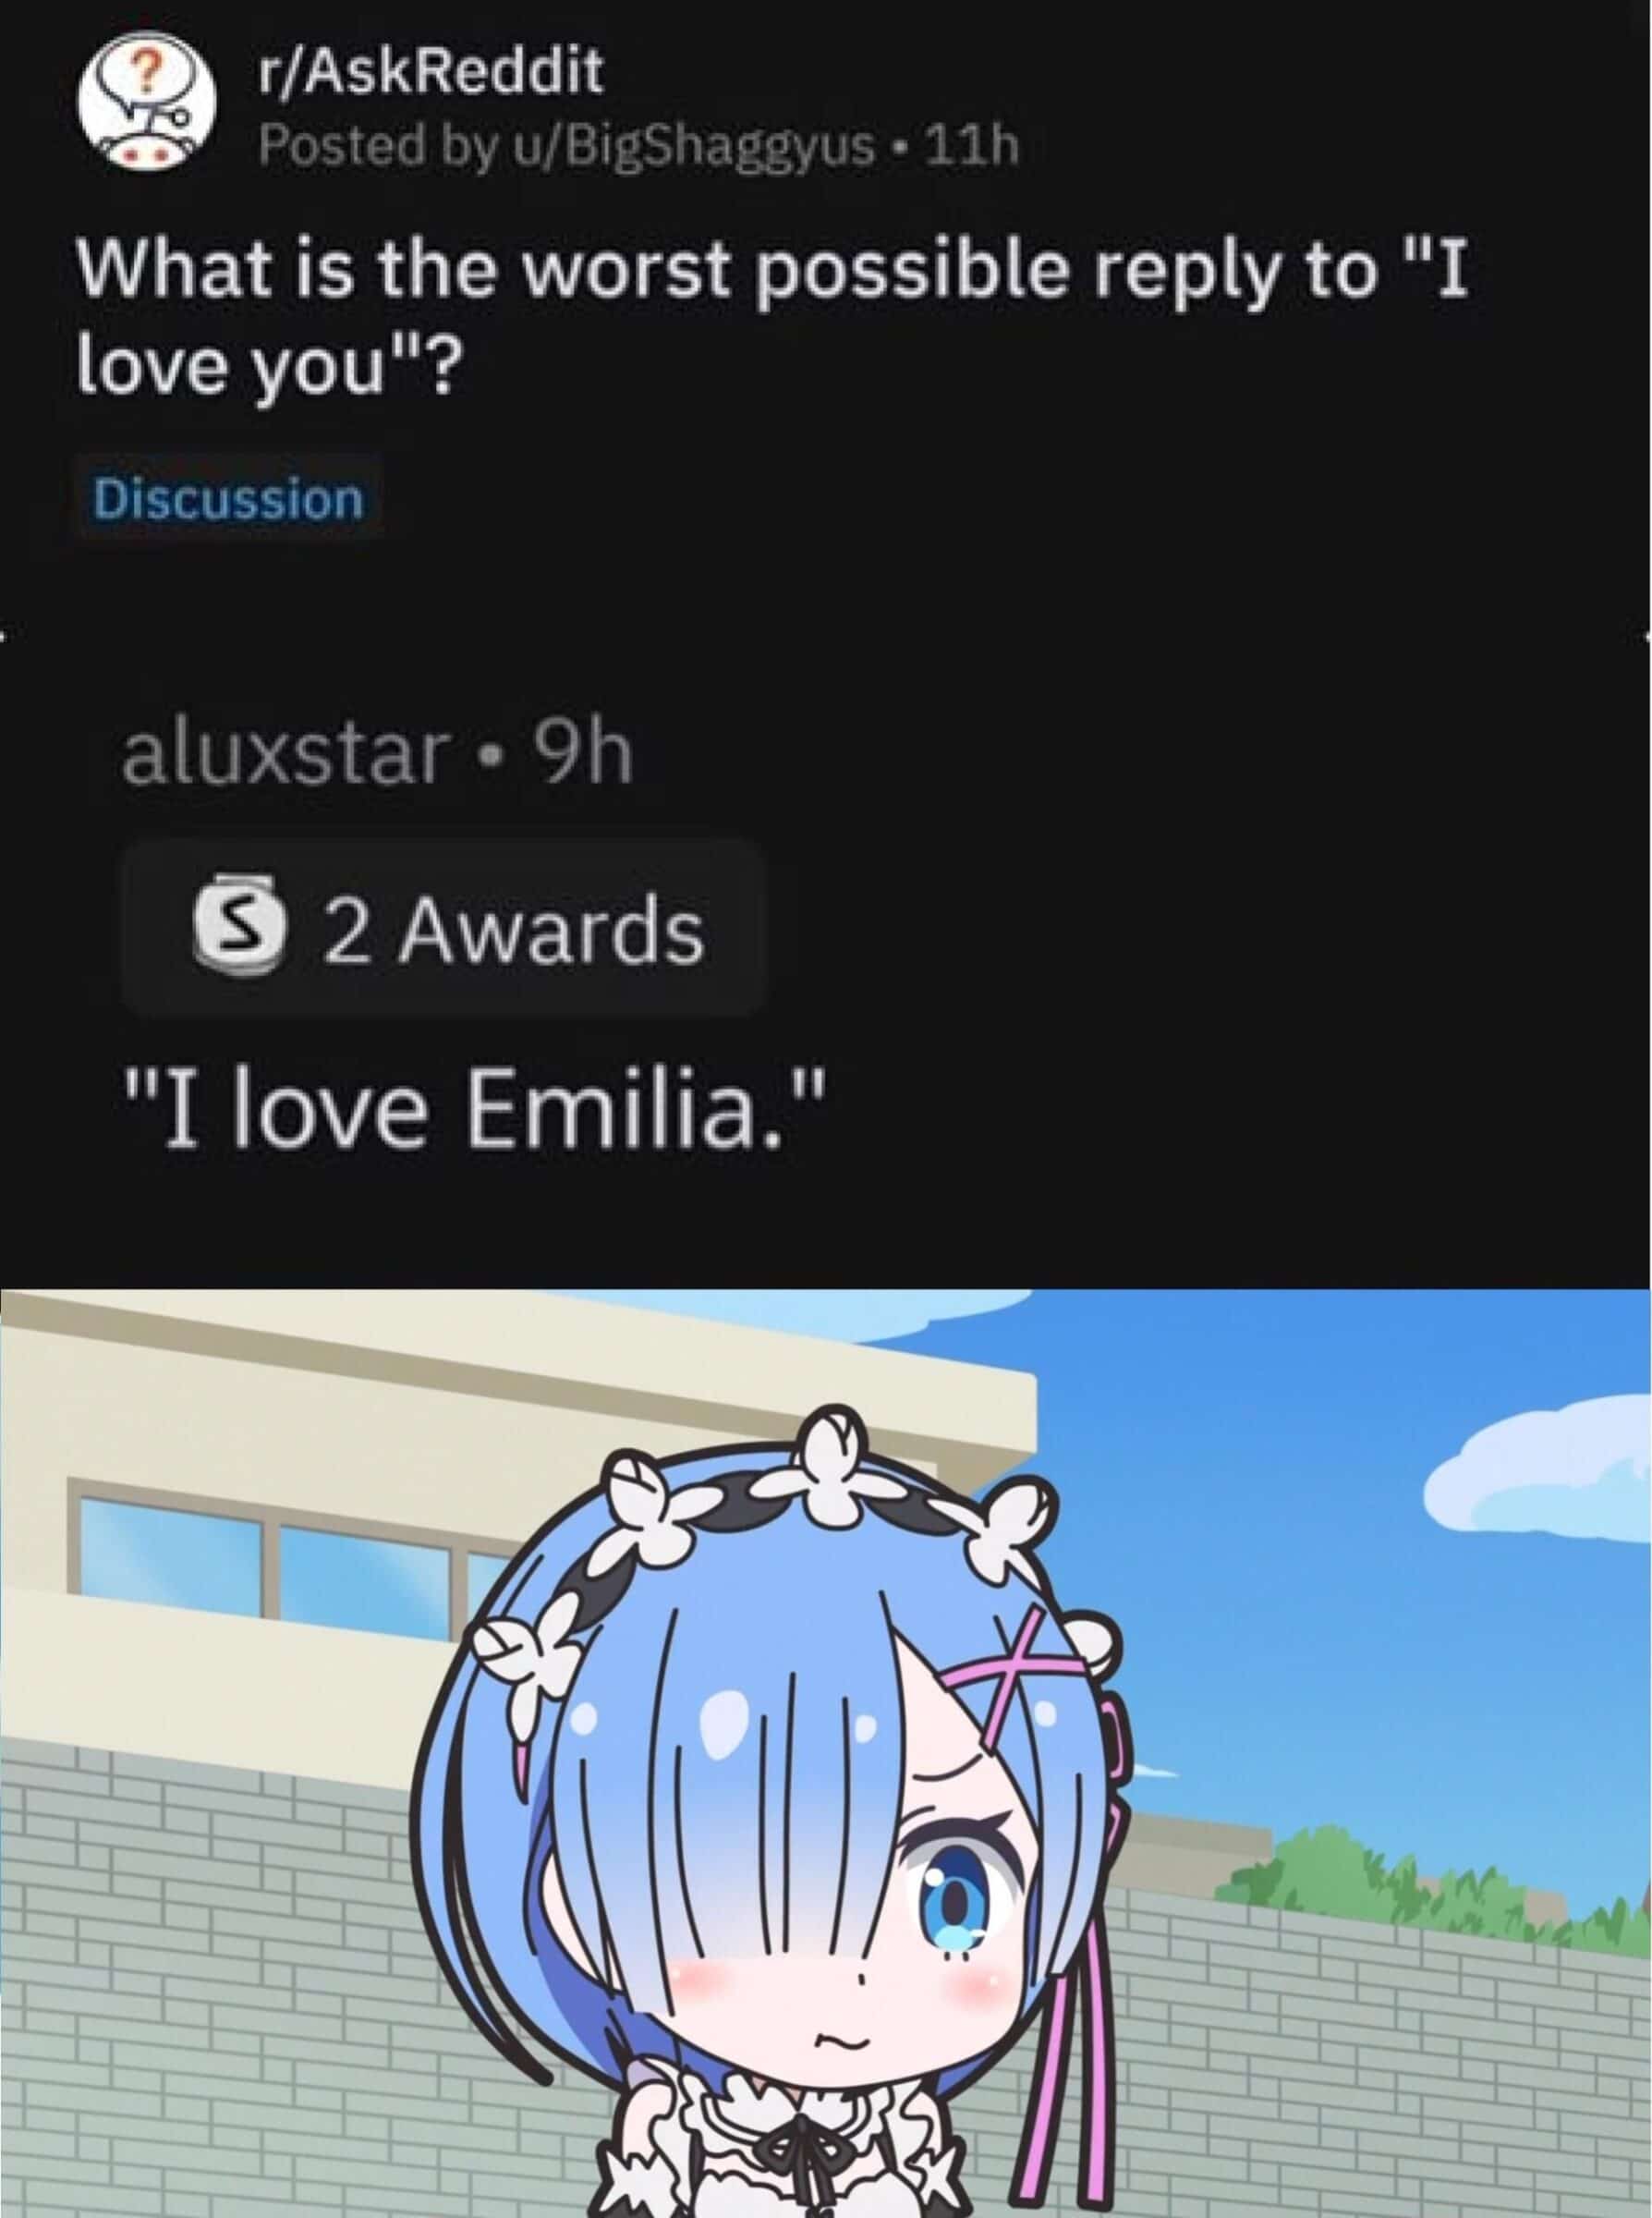 Anime,  Anime Memes Anime,  text: r/AskReddit Posted by u/BigShaggyus • llh What is the worst possible reply to ill love you